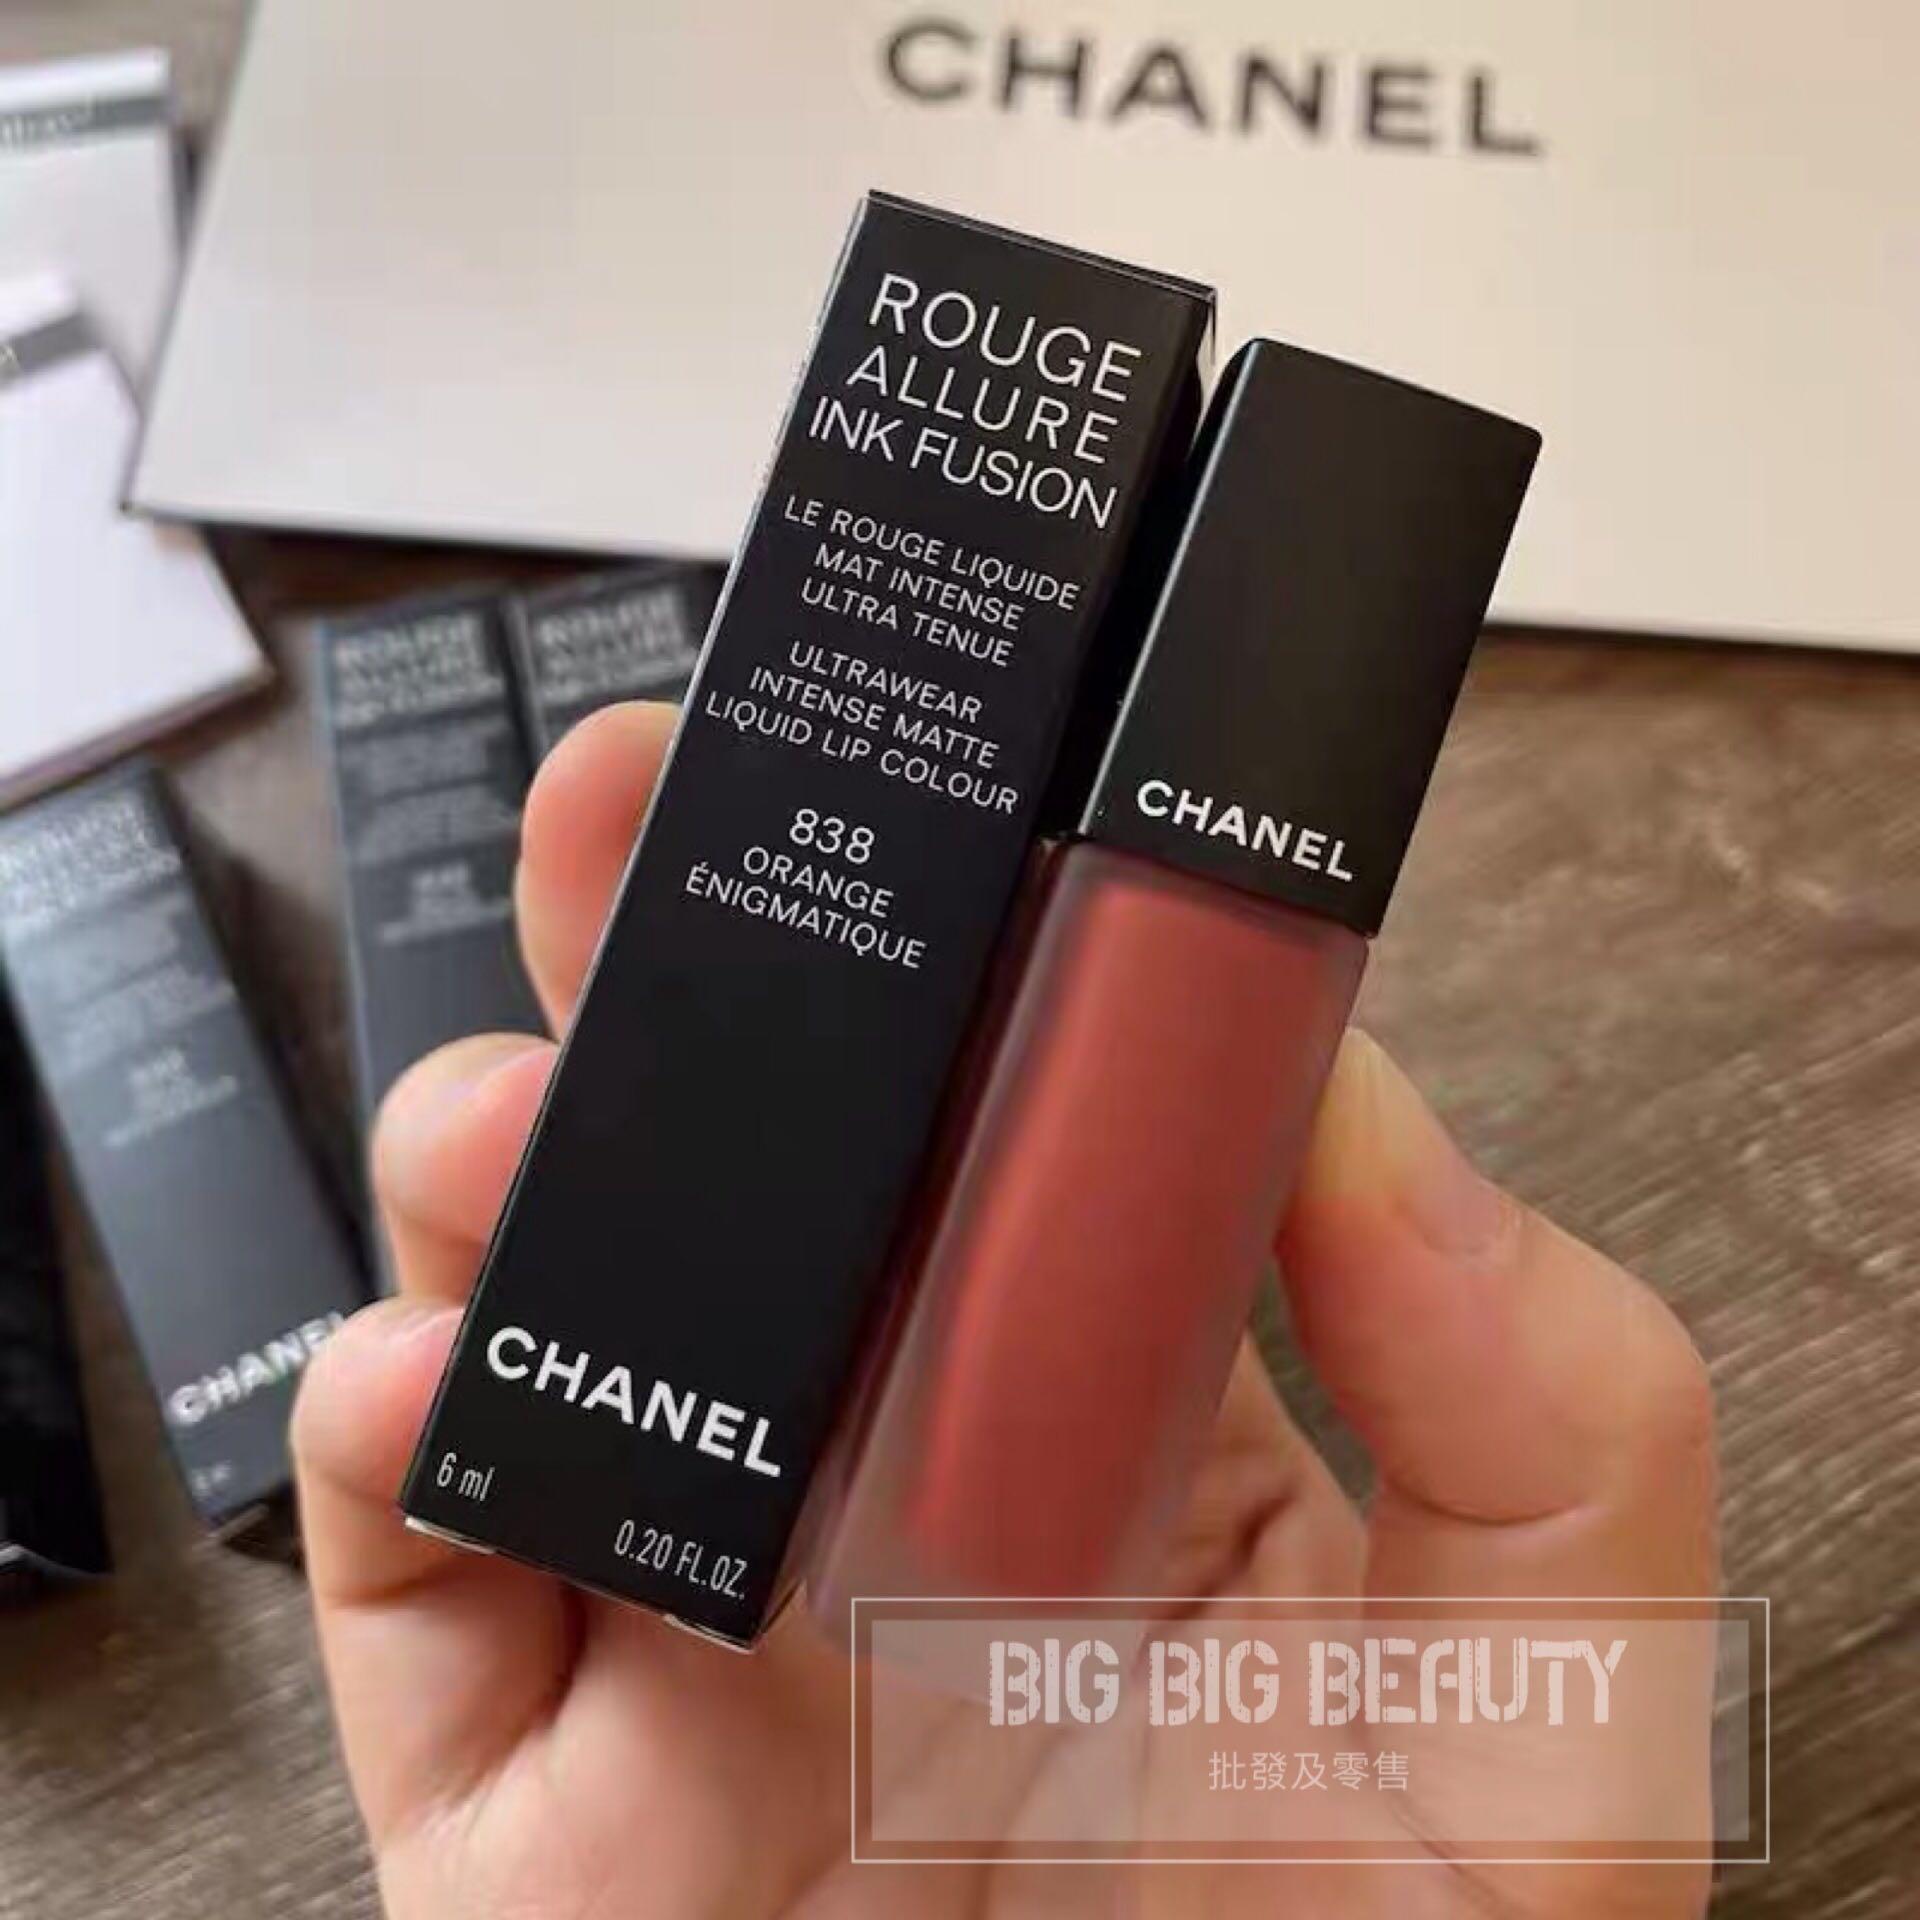 NEW ROUGE ALLURE INK FUSION + METALLIC CHANEL LIPSTICK REVIEW! 